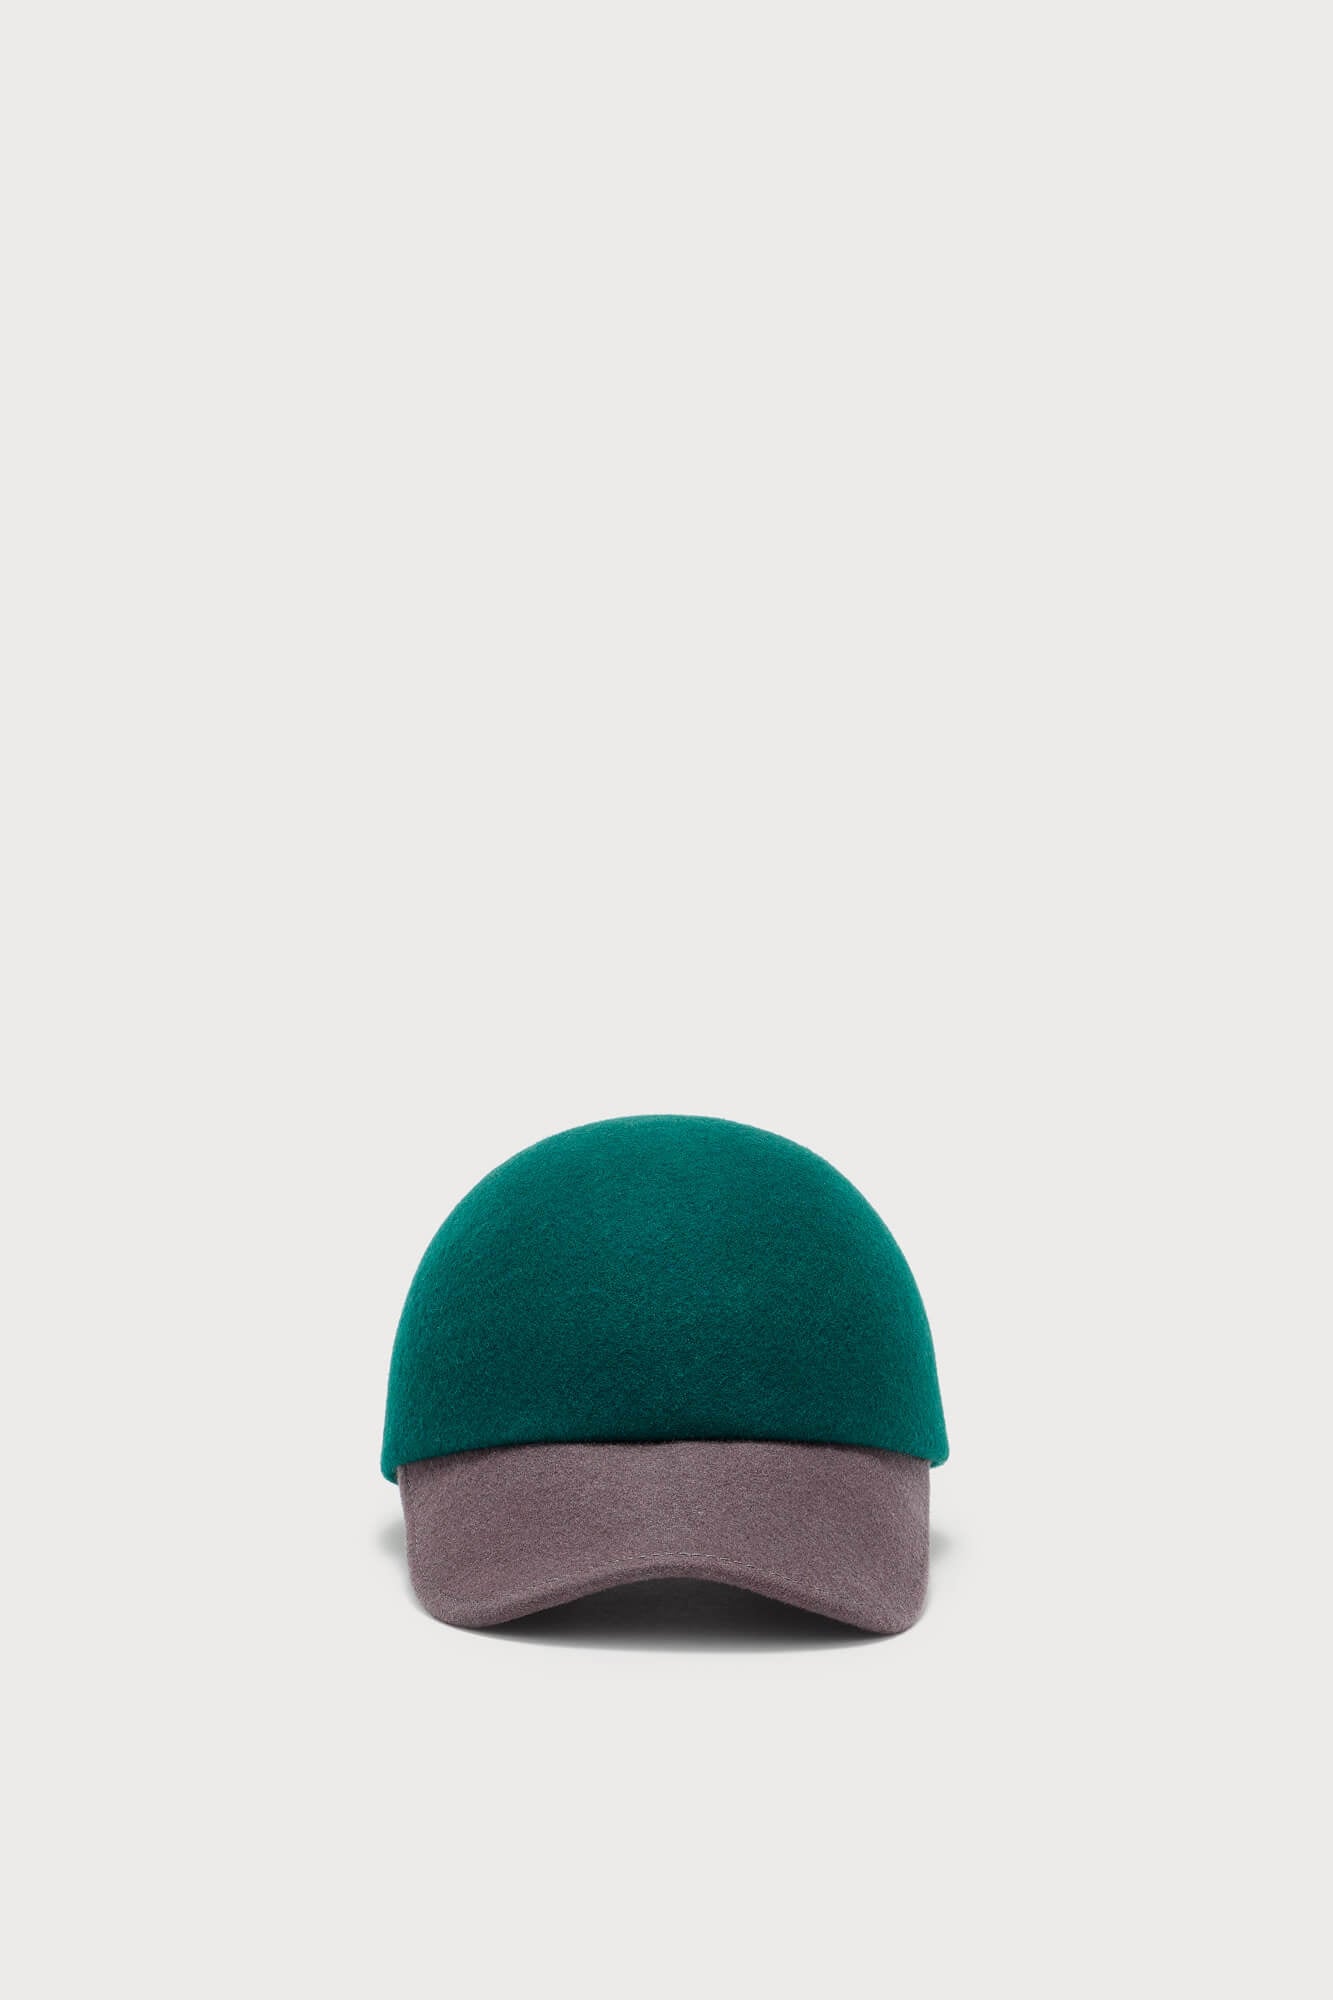 Forest Green and Black Wool Cap